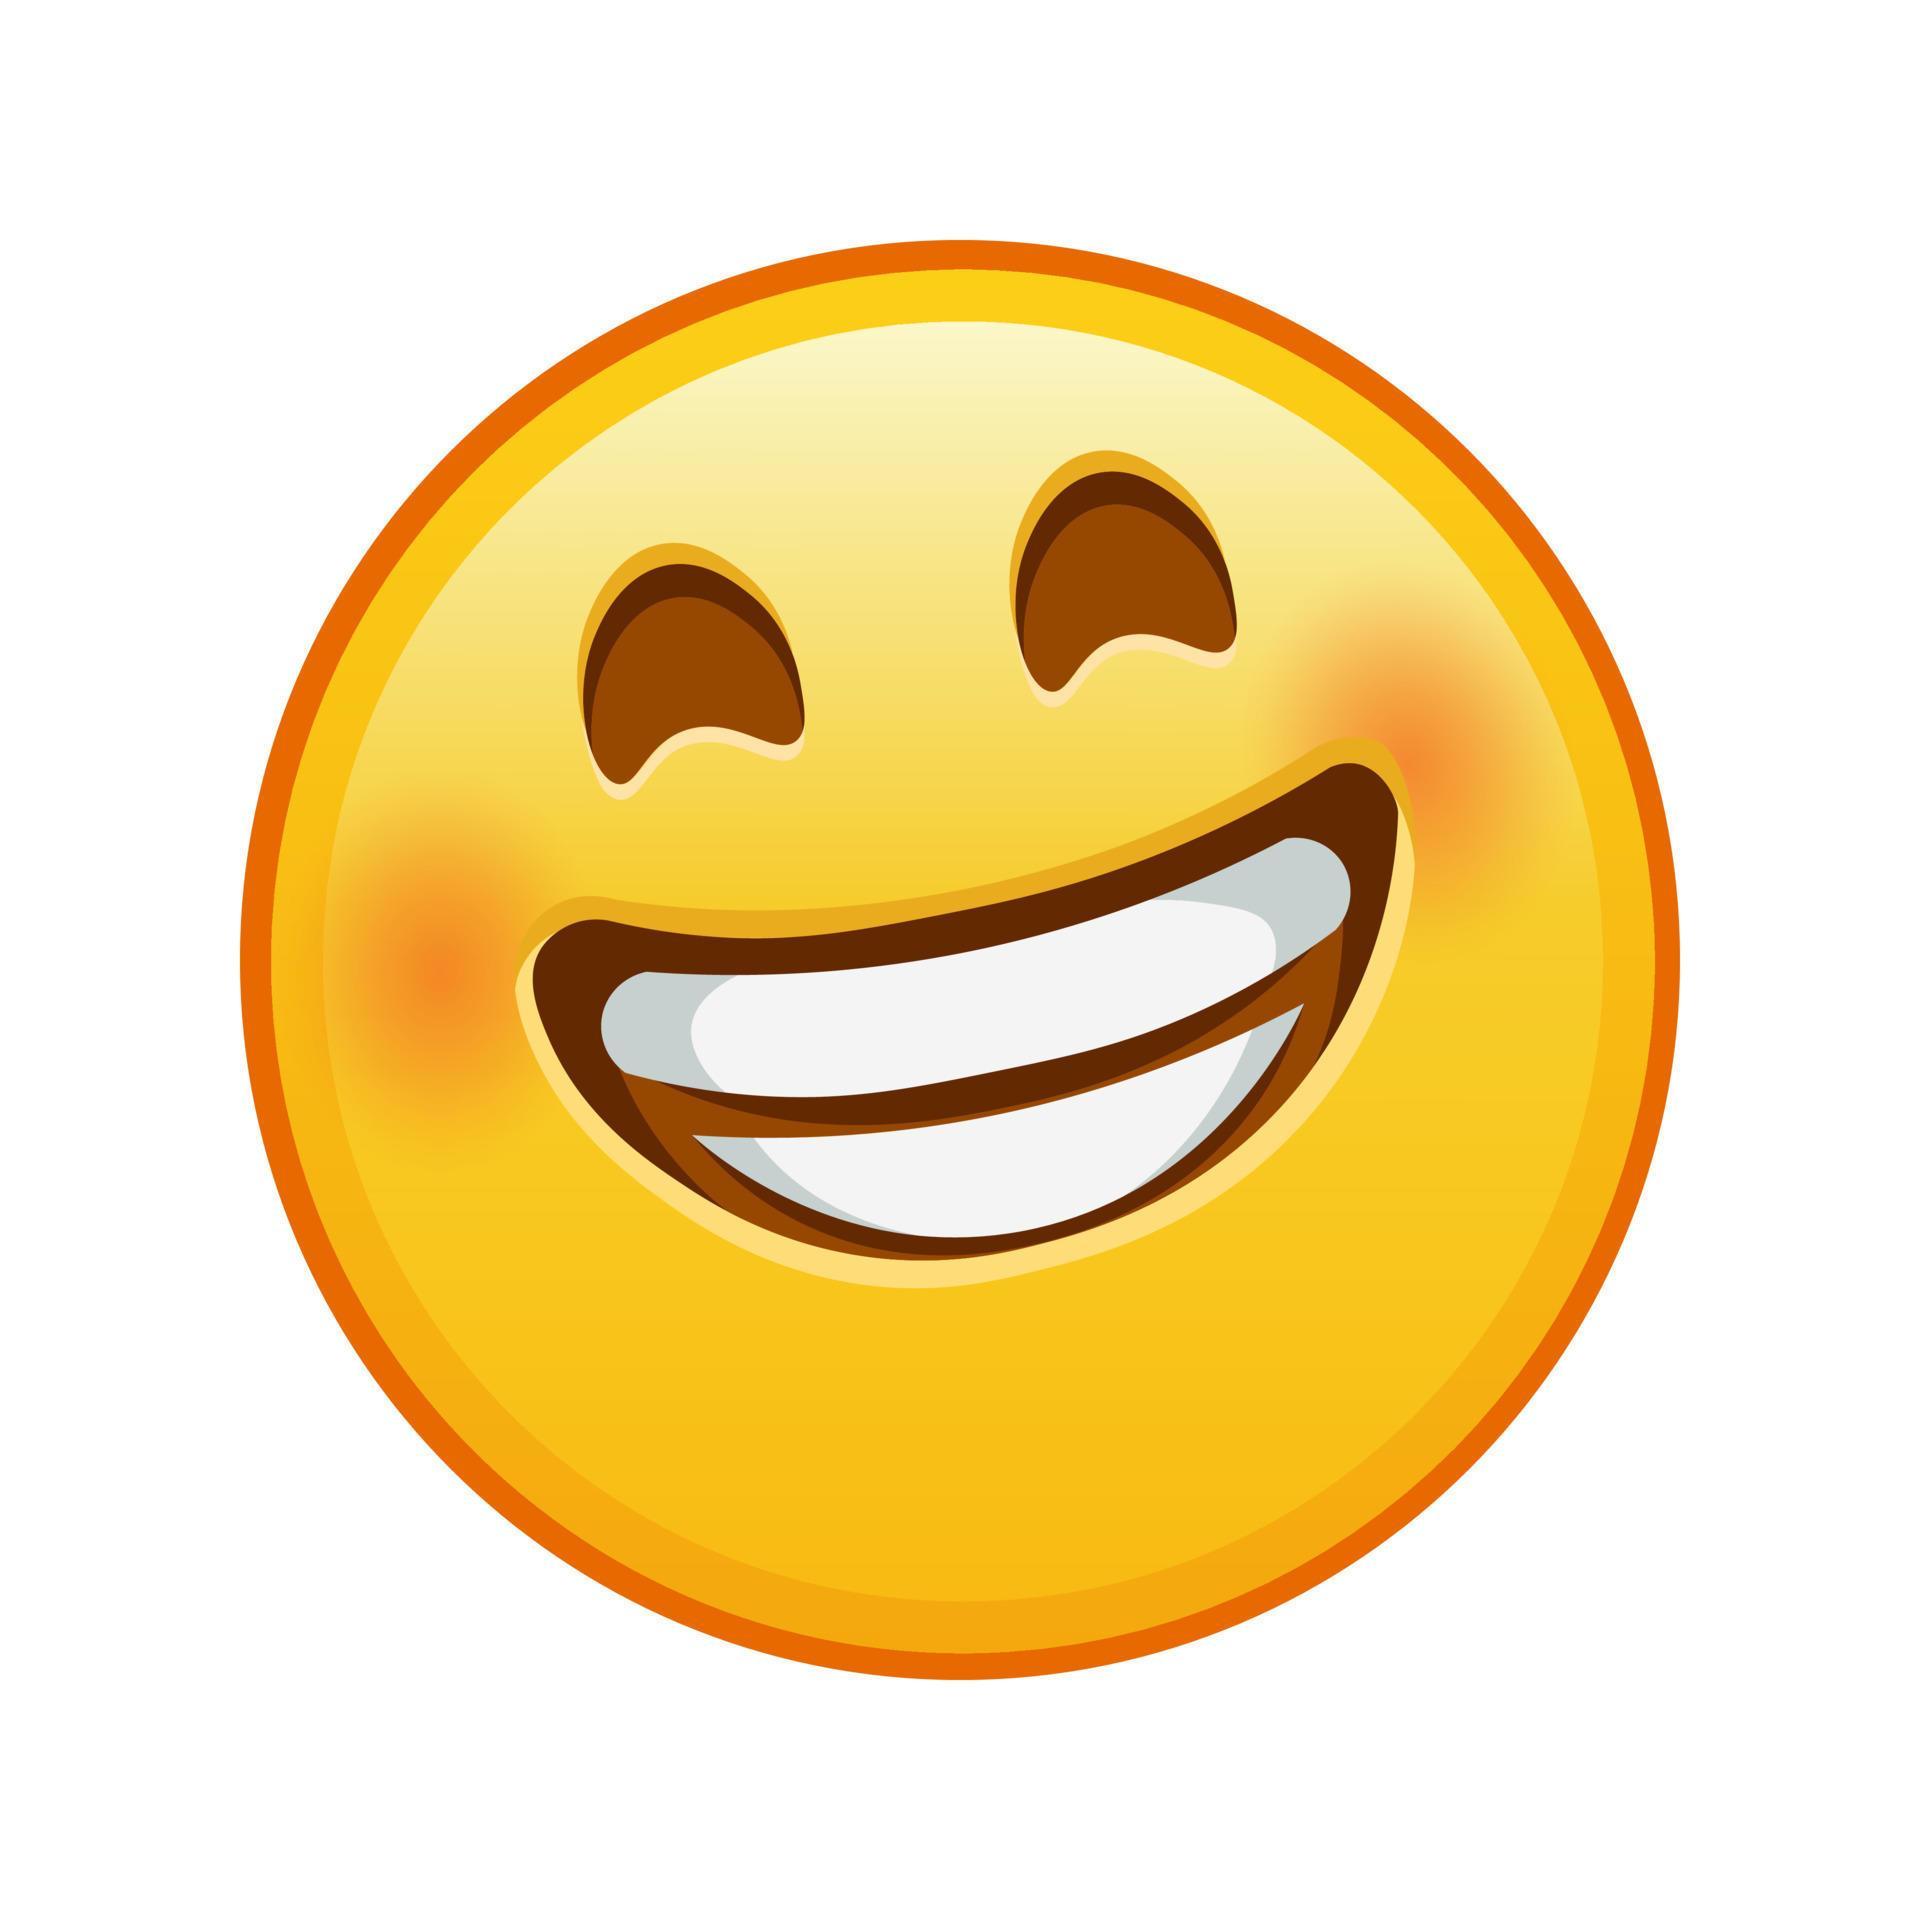 Grinning face with laughing eyes Large size of yellow emoji smile ...